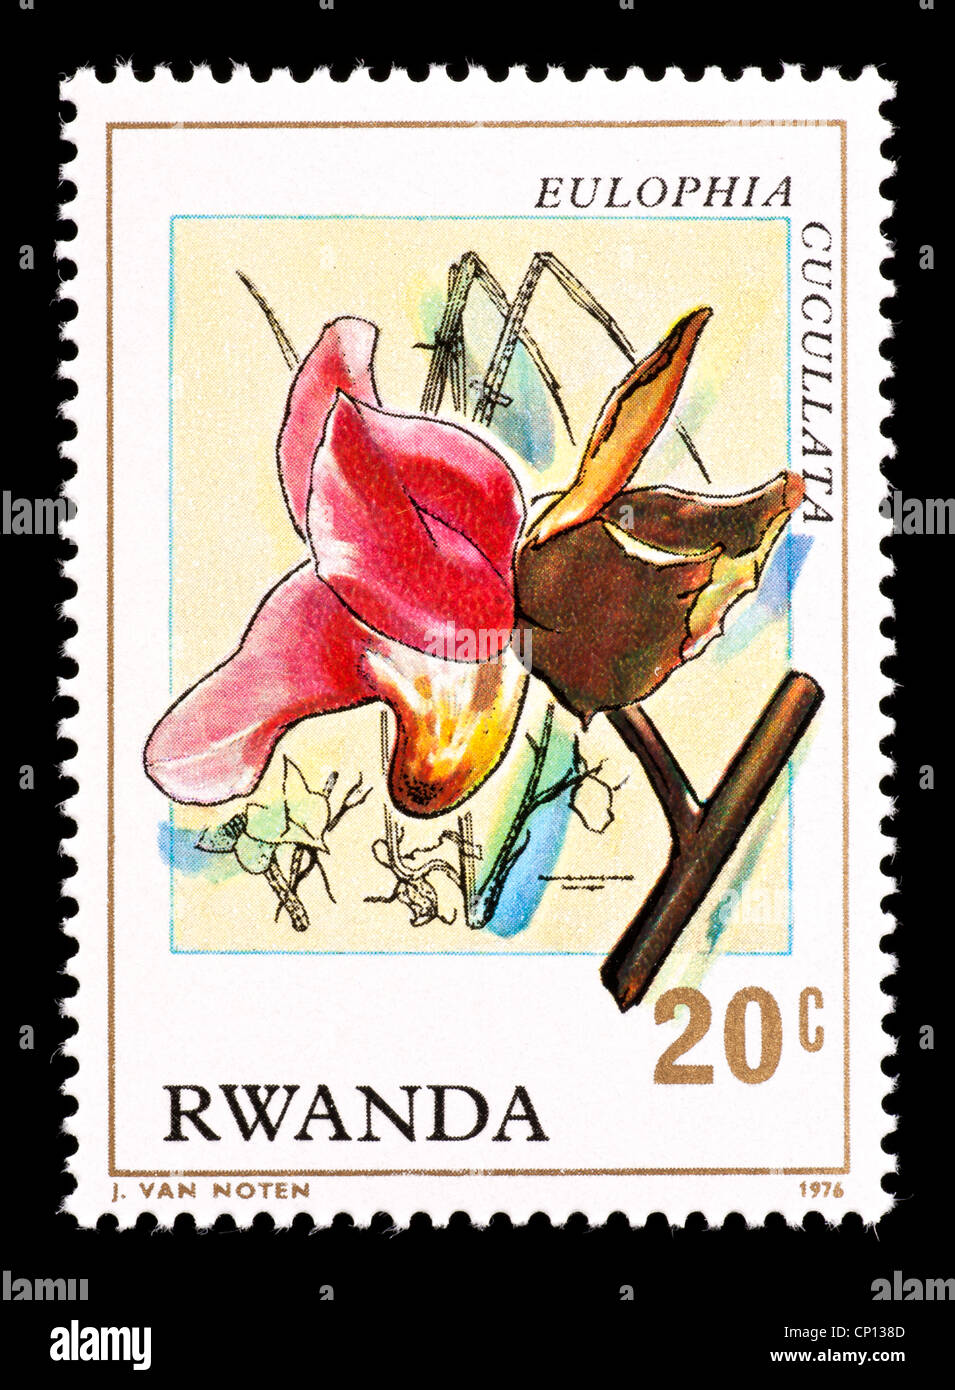 Postage stamp from Rwanda depicting a tropical orchid (Eulophia cucullata) Stock Photo